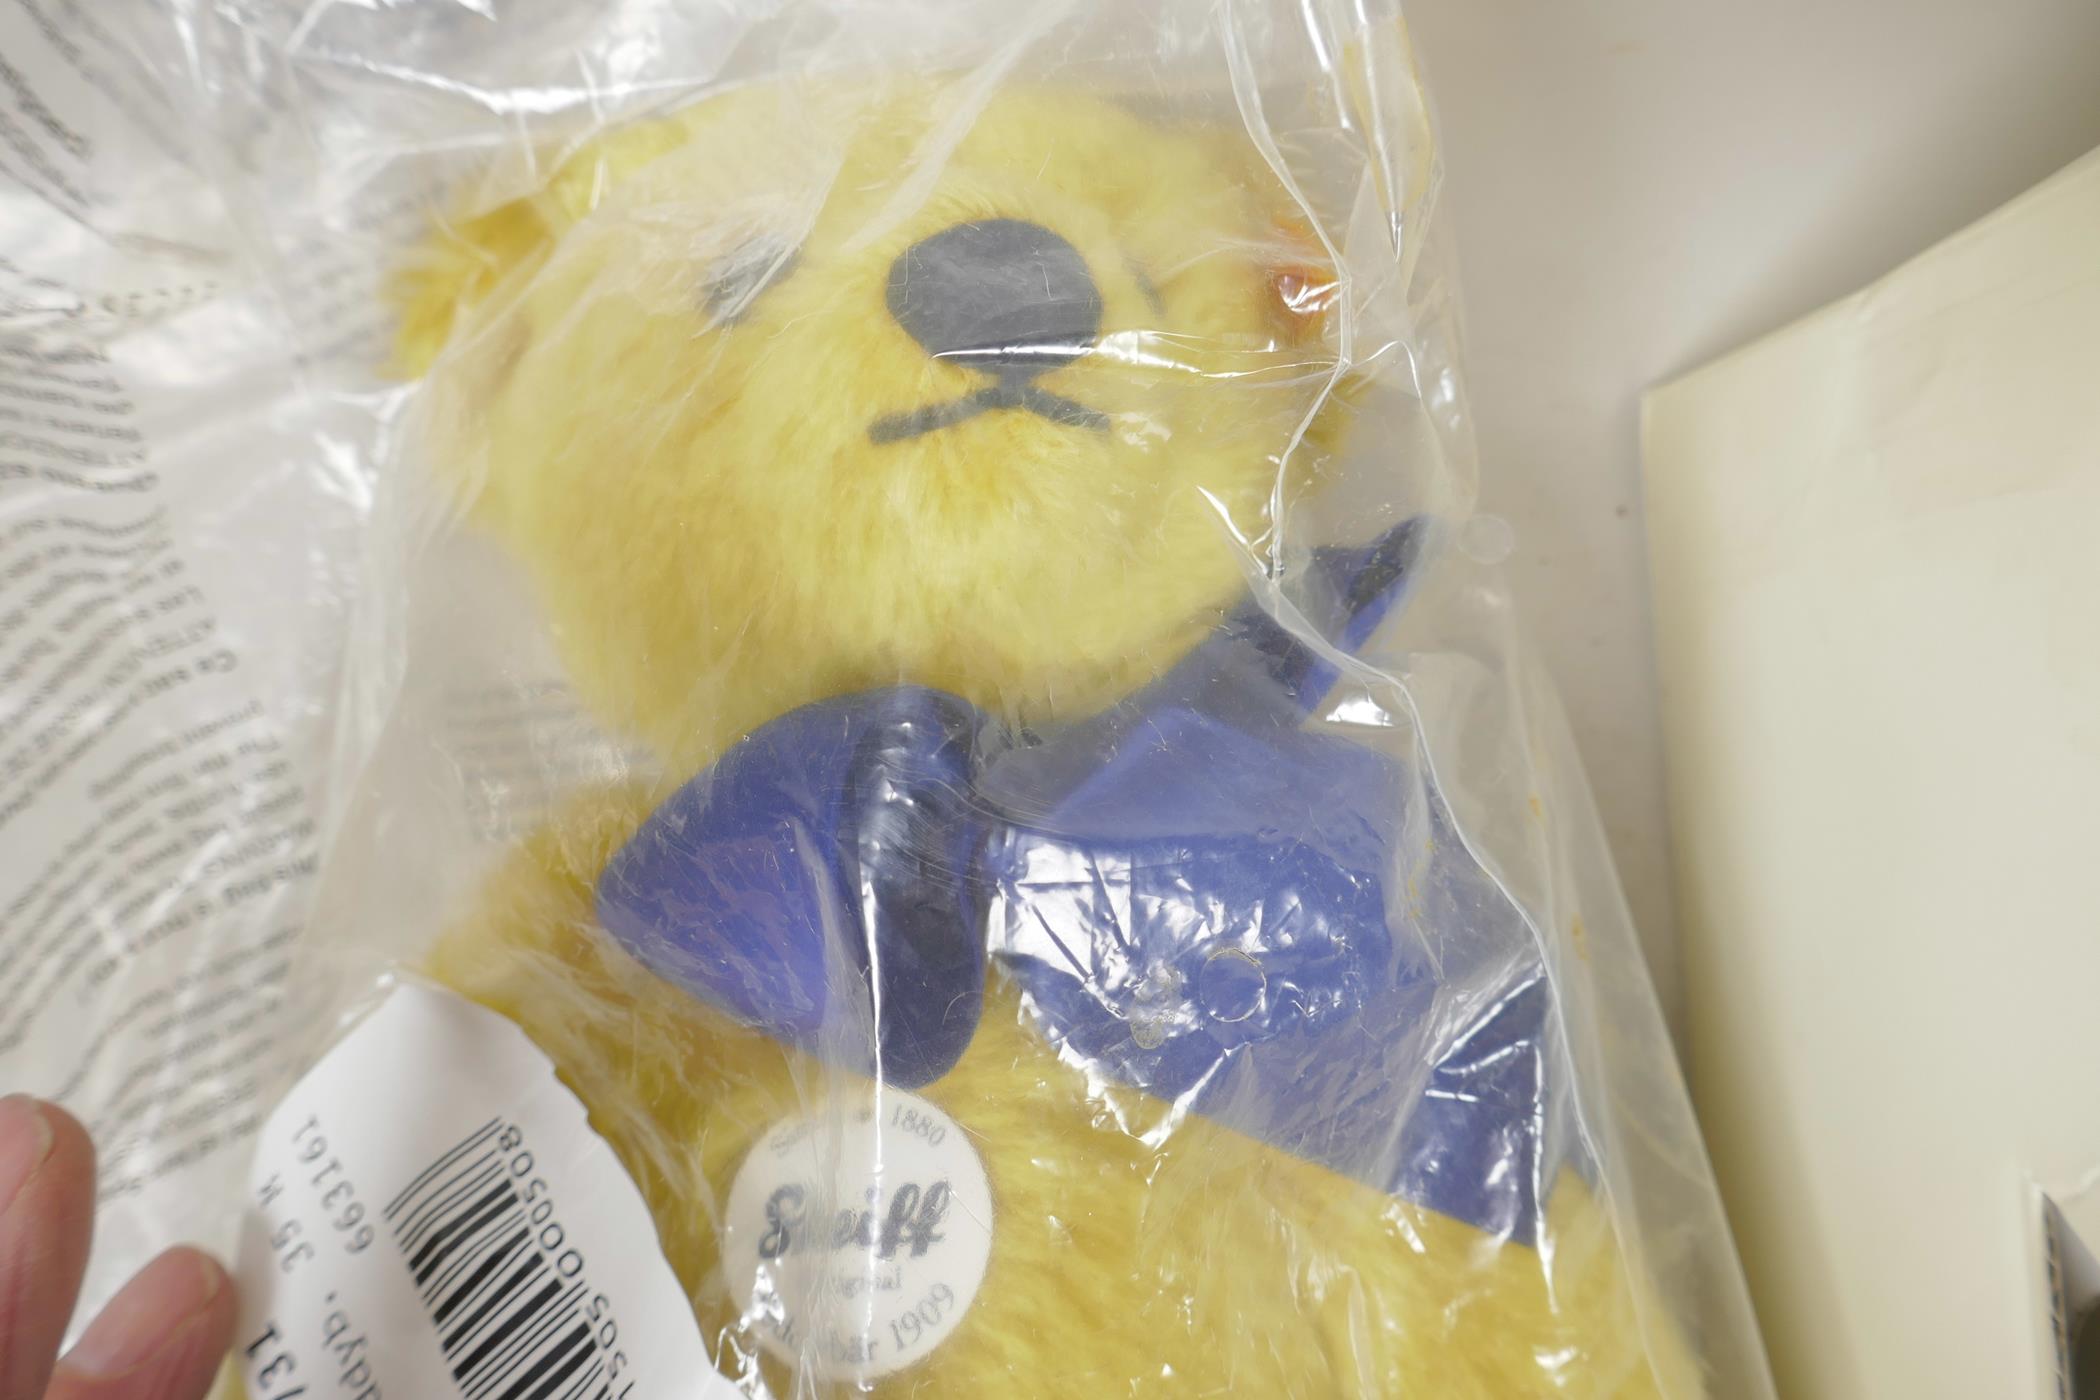 A Steiff 1909 replica teddy bear with growler and blue bow, 13" tall, in original box and packaging - Image 2 of 3